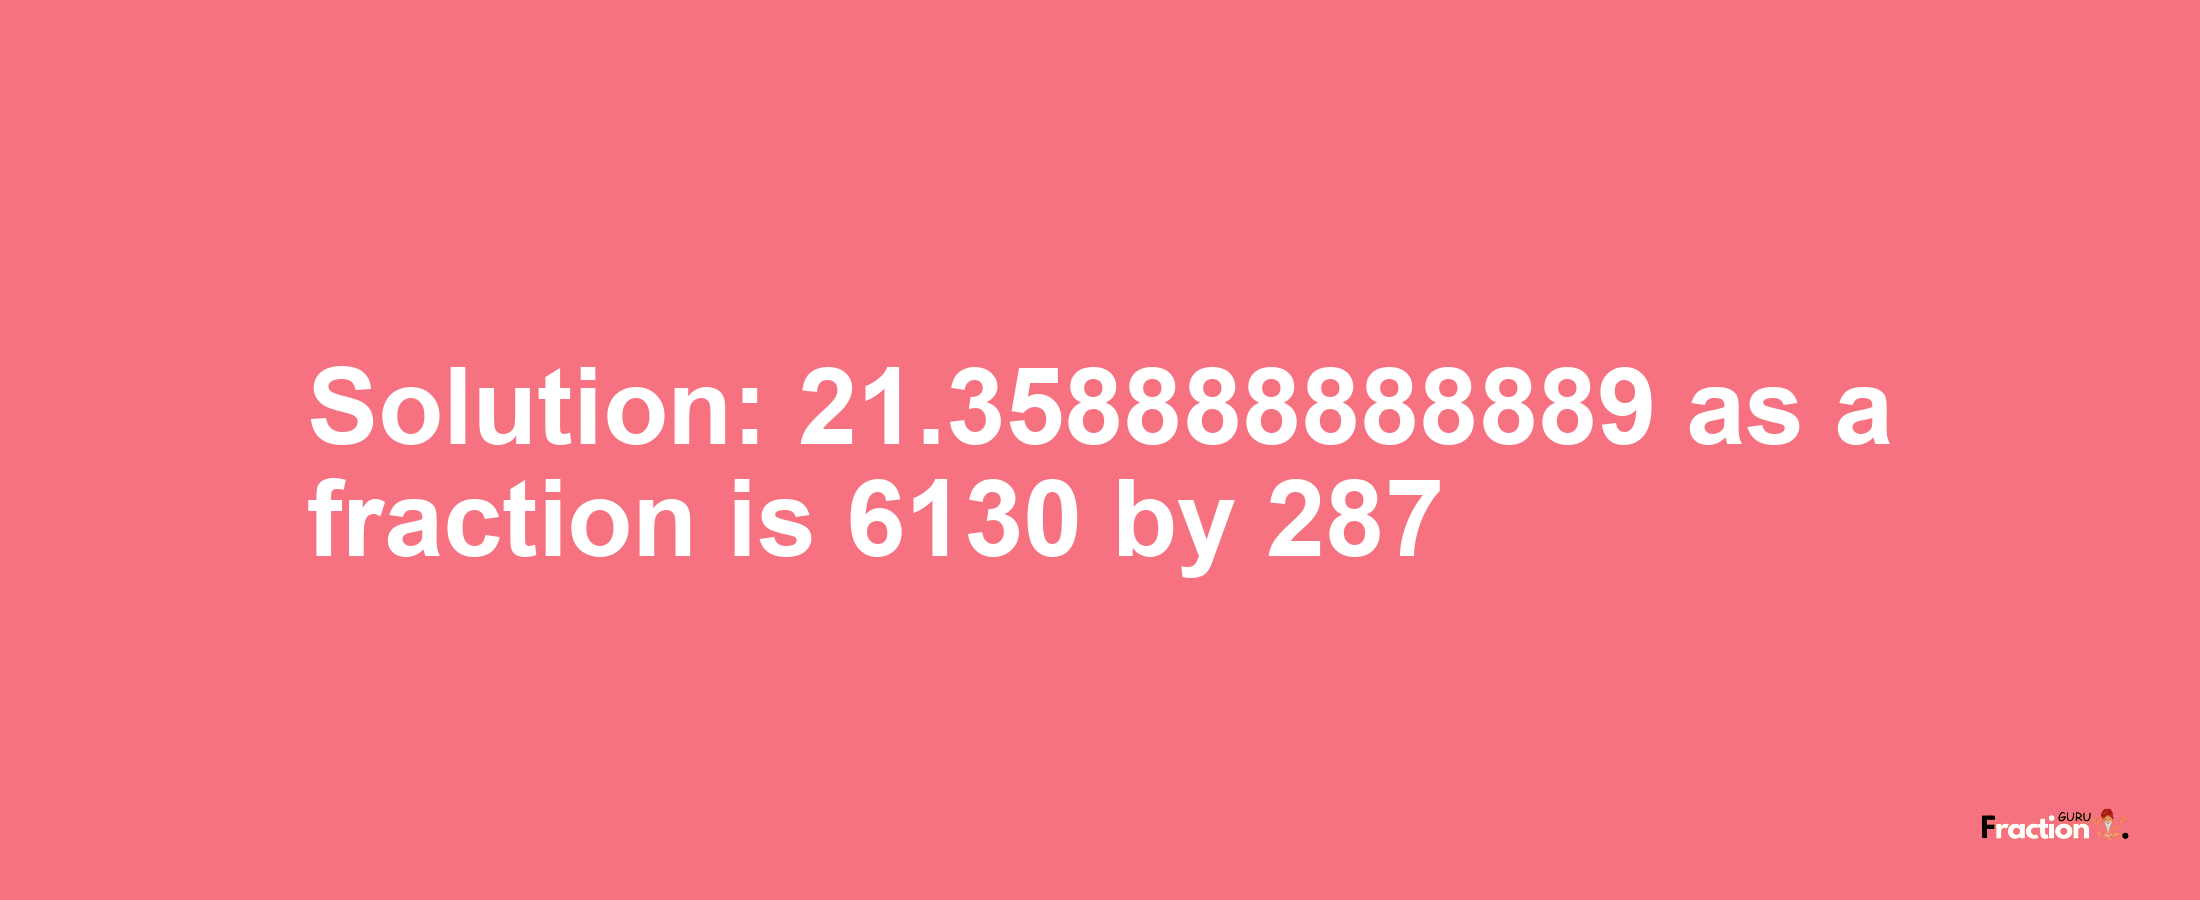 Solution:21.358888888889 as a fraction is 6130/287